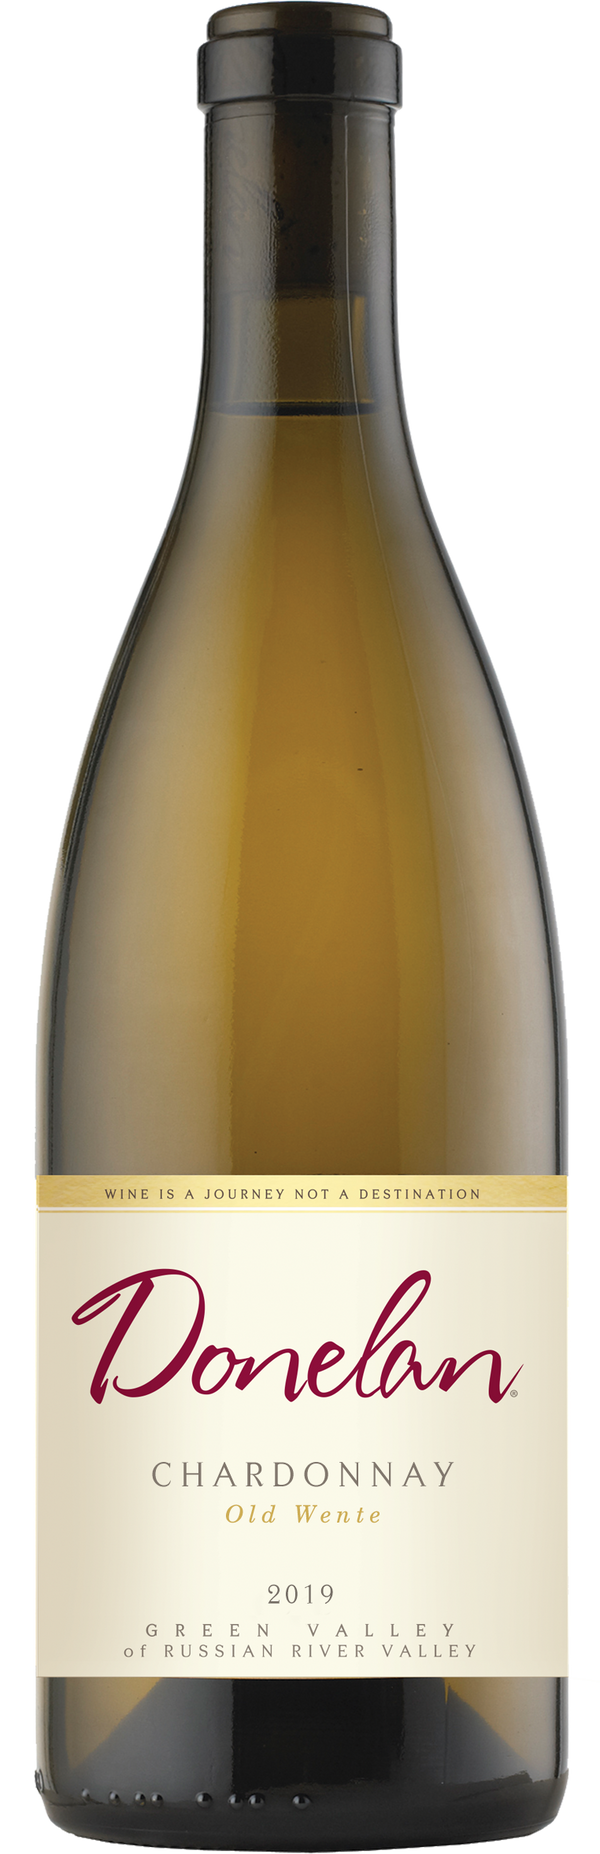 Donelan, Old Wente, Chardonnay, Russian River Valley, 2019